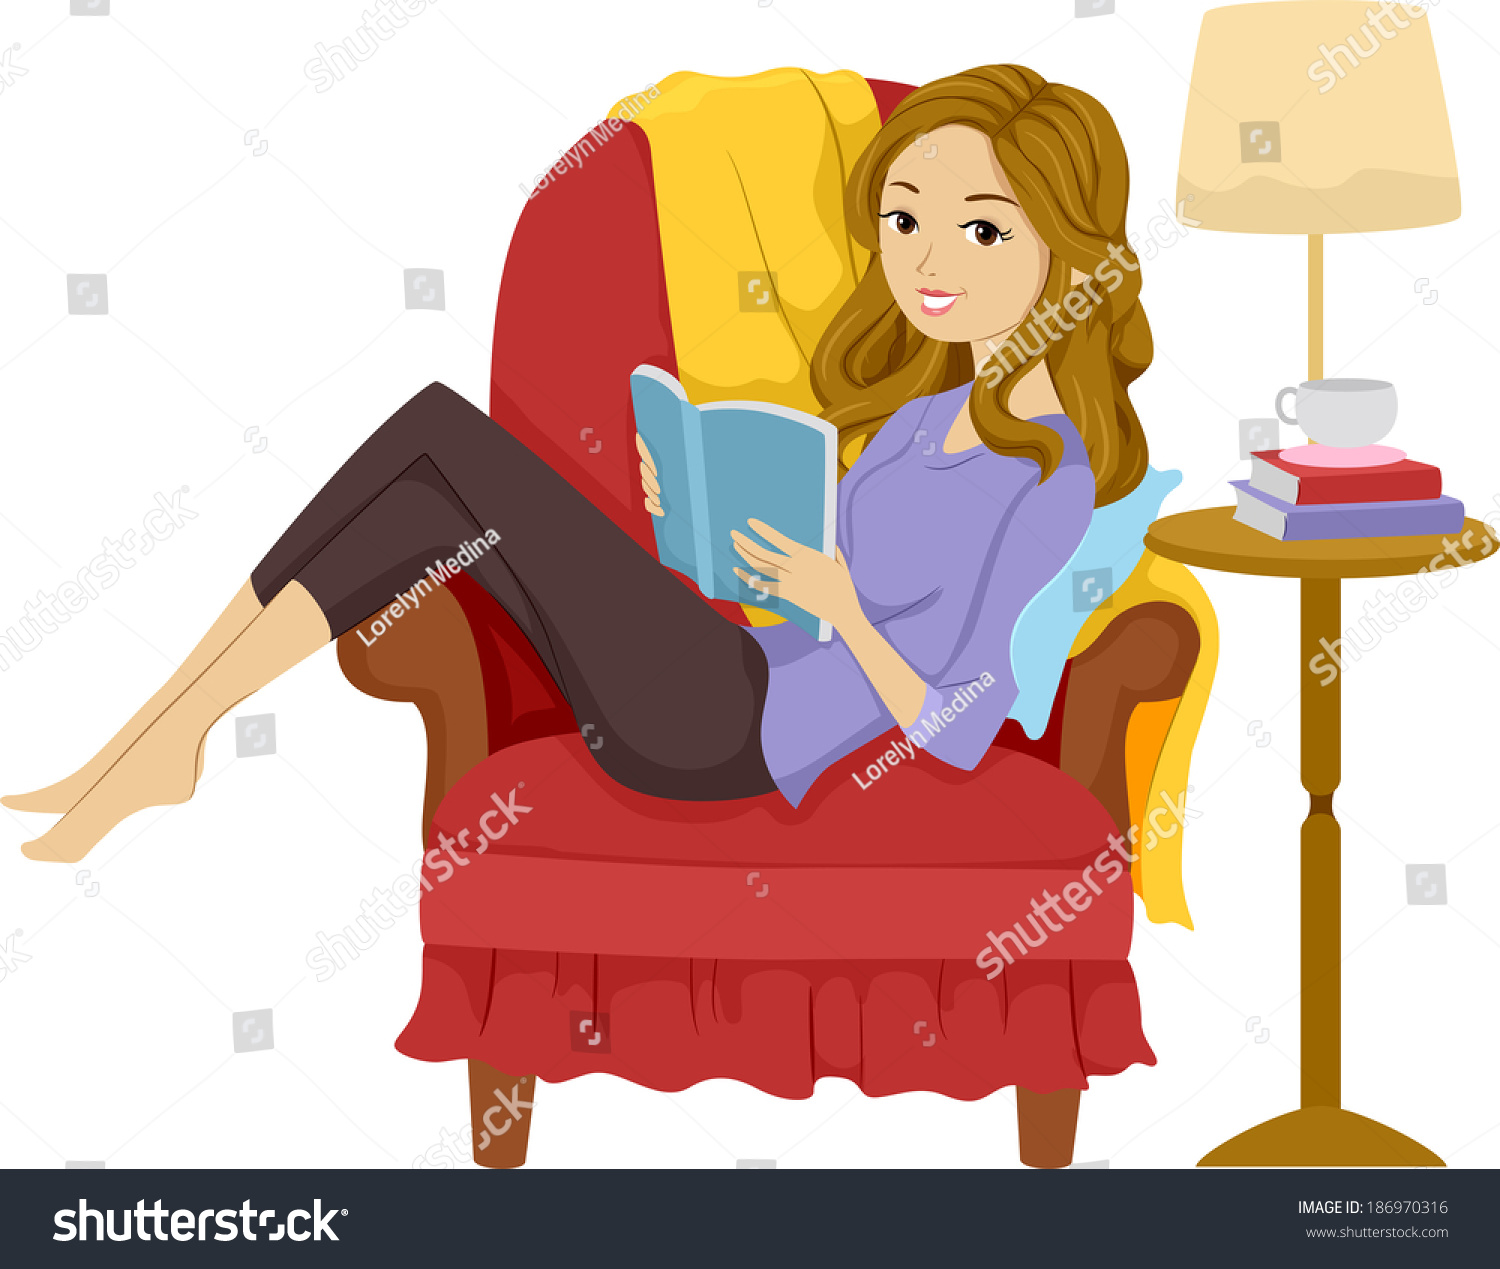 clipart woman reading book - photo #31